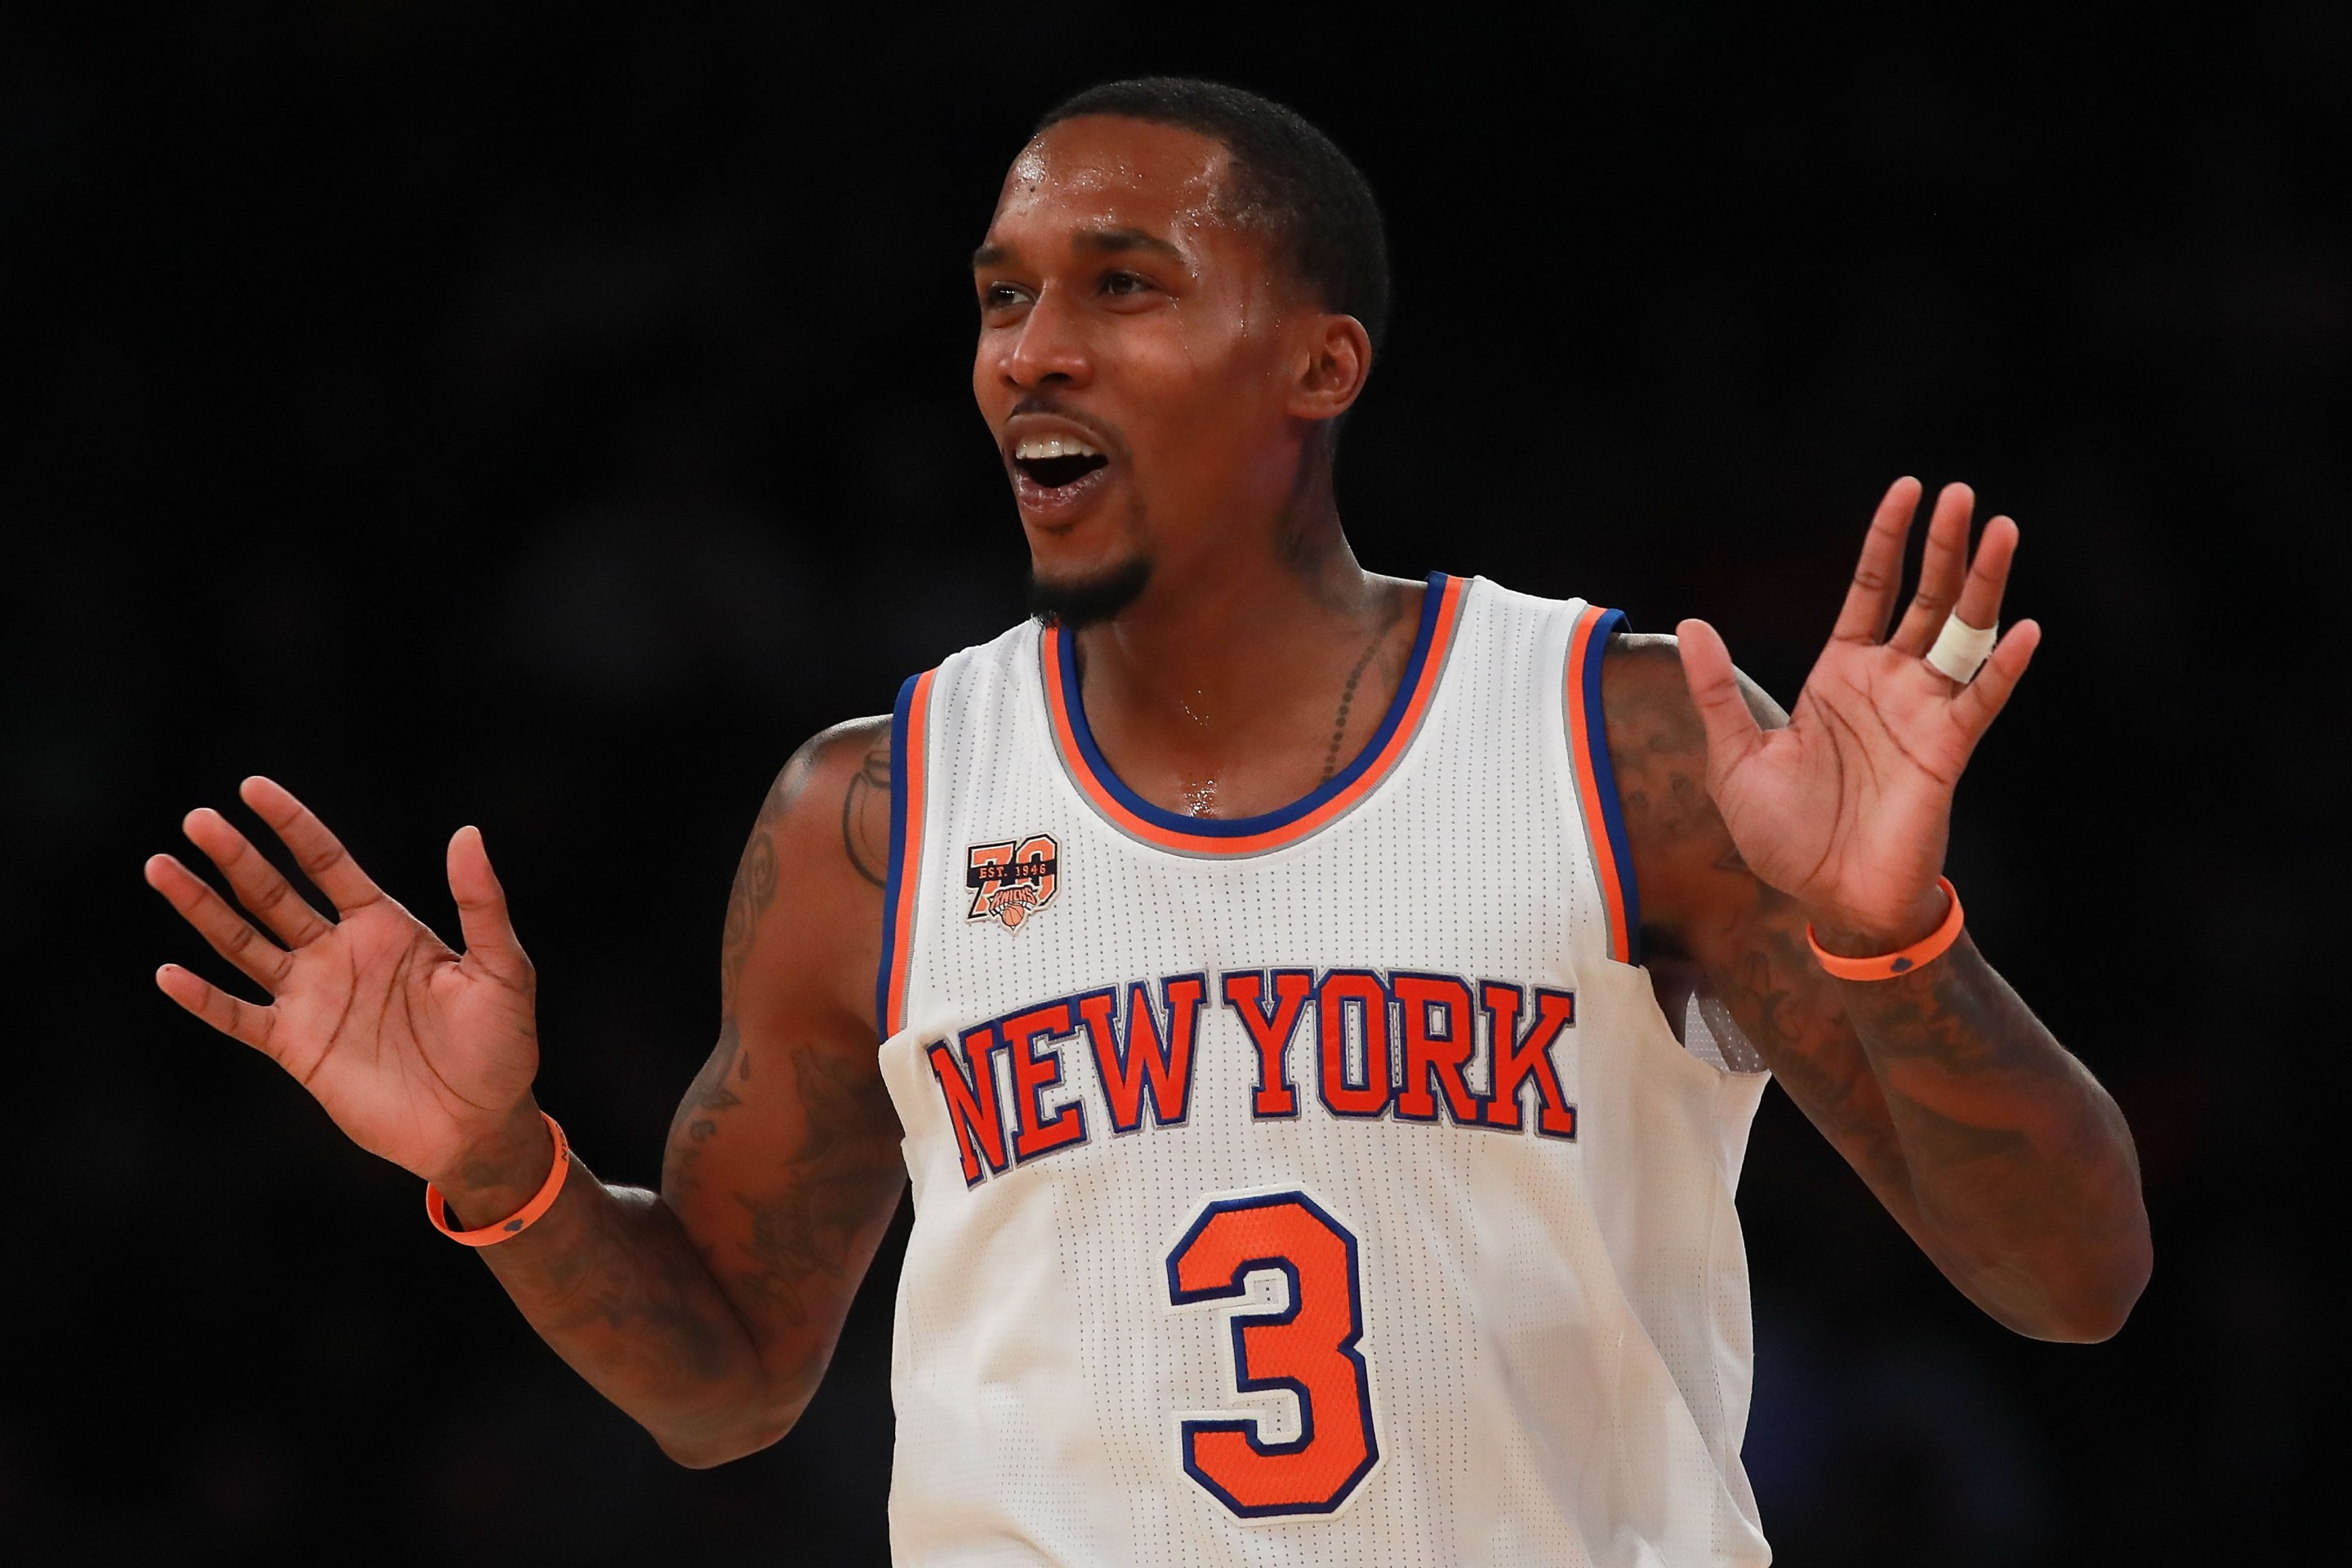 NBA megastar Brandon Jennings seen here objecting to a foul call while with the Knicks, a team he apparently played for.